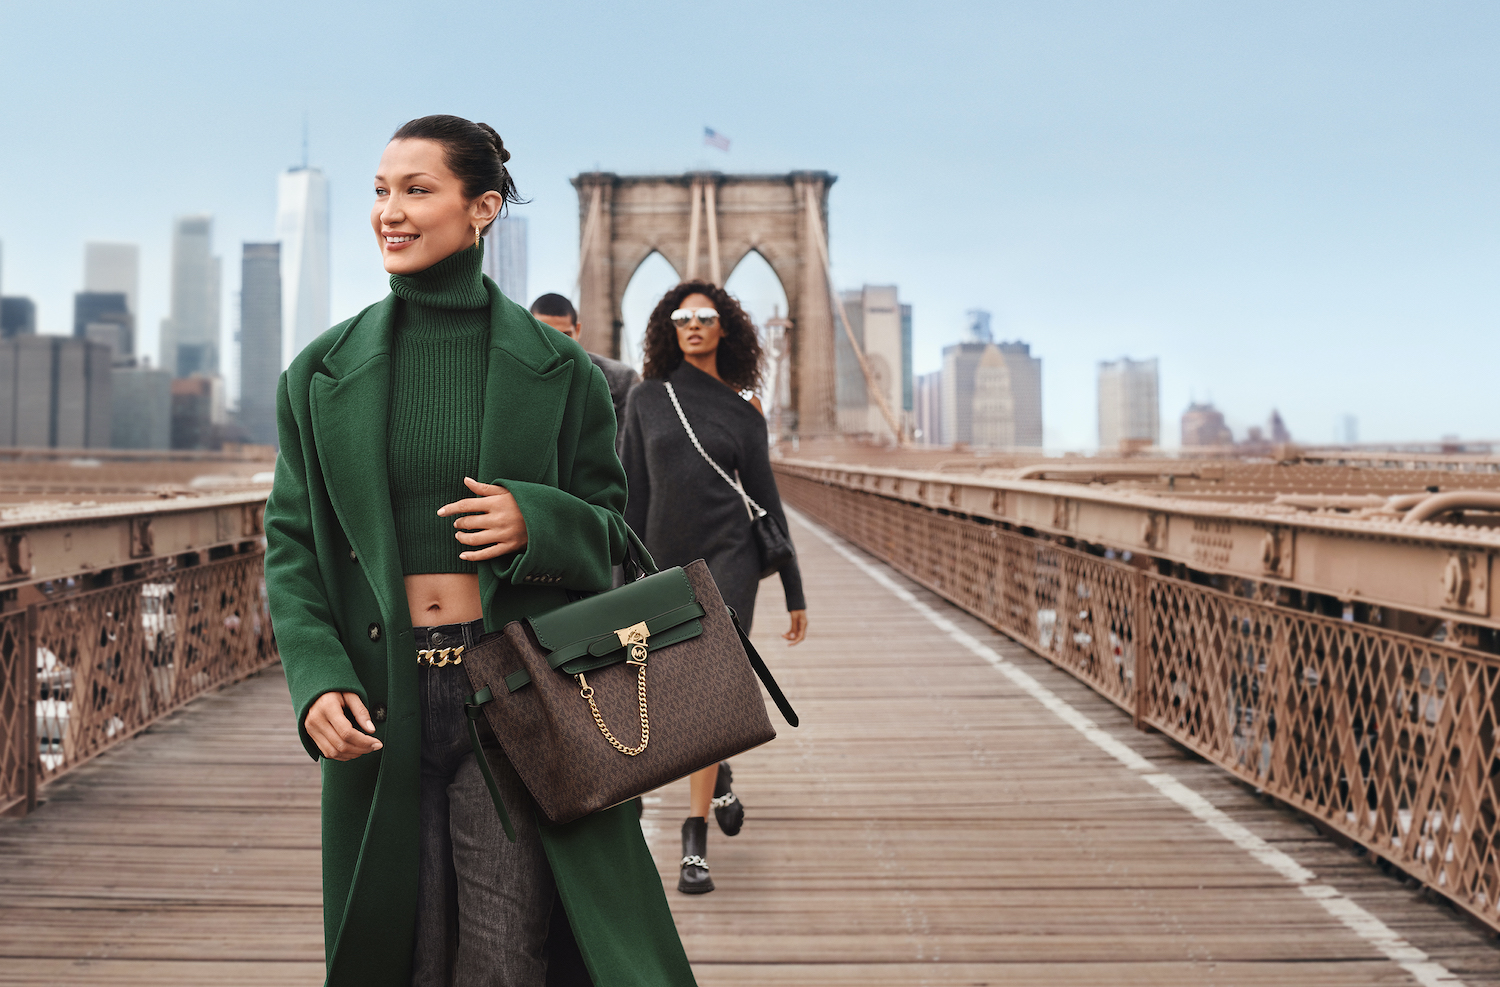 Michael Kors - Admiring the view: Bella Hadid stars in our Spring 2021  Michael Kors ad campaign, inspired by celebrated editor and fashion icon  Diana Vreeland's famous saying, “The Eye Has To